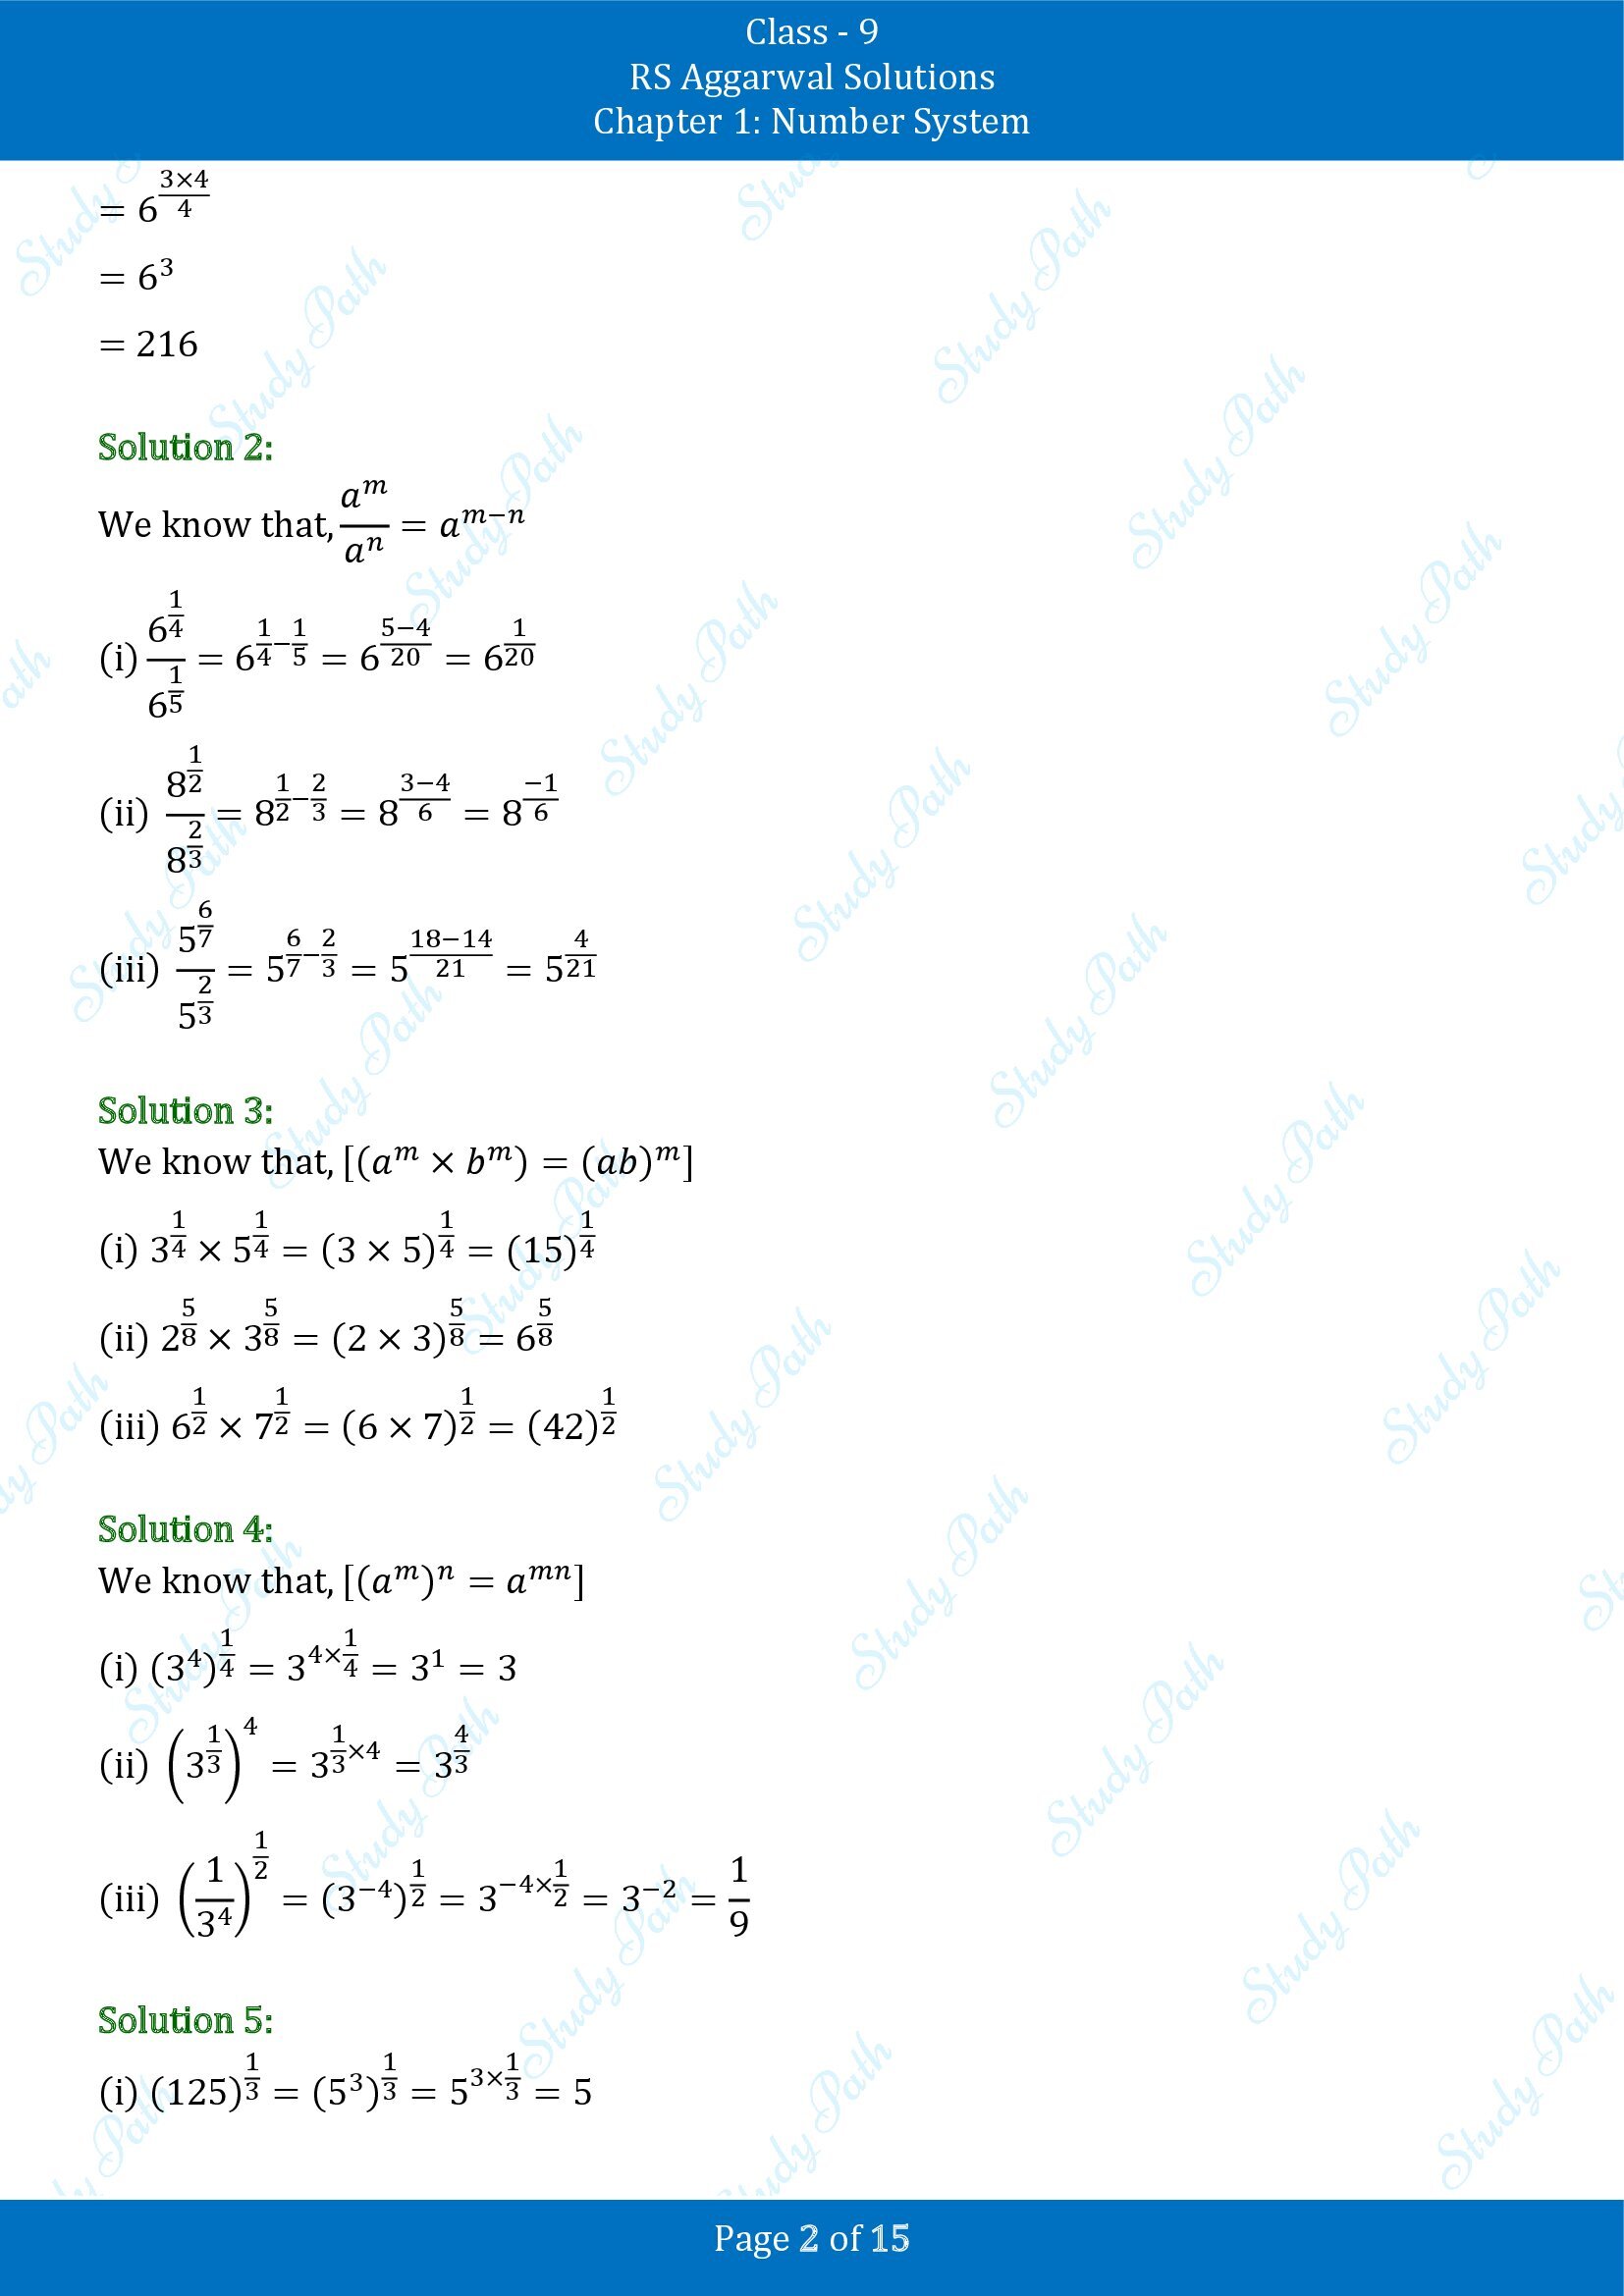 RS Aggarwal Solutions Class 9 Chapter 1 Number System Exercise 1G 00002